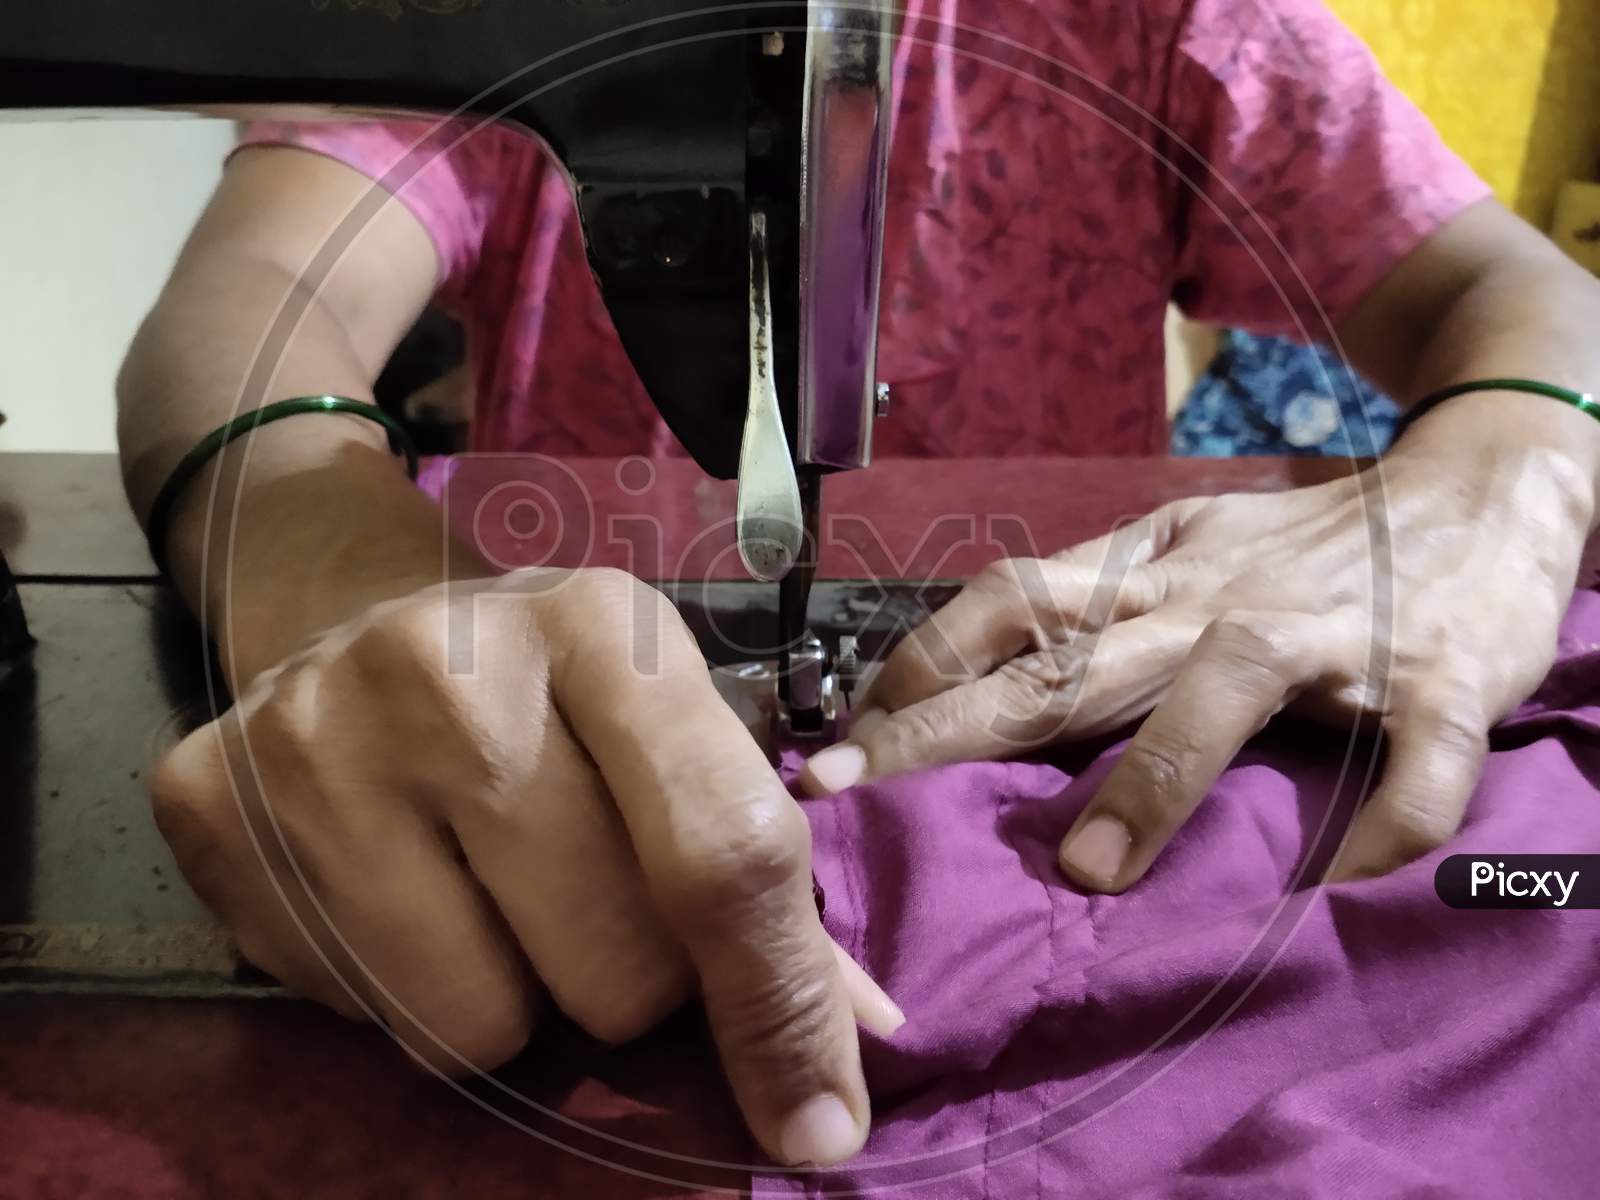 Tailoring work- Indian woman sewing clothes